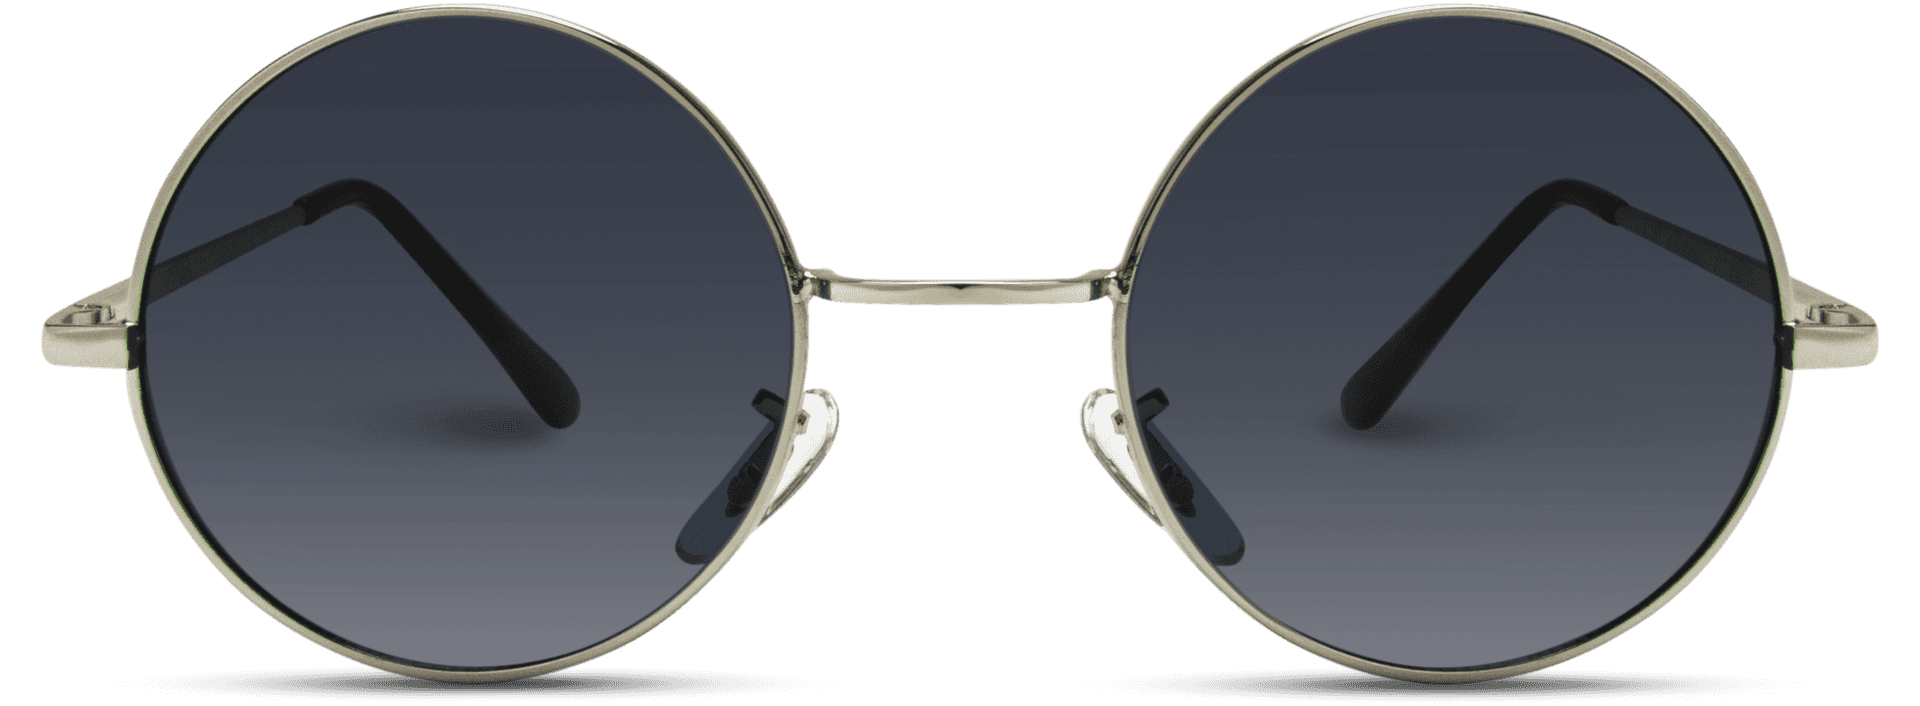 Classic Aviator Sunglasses Product View PNG